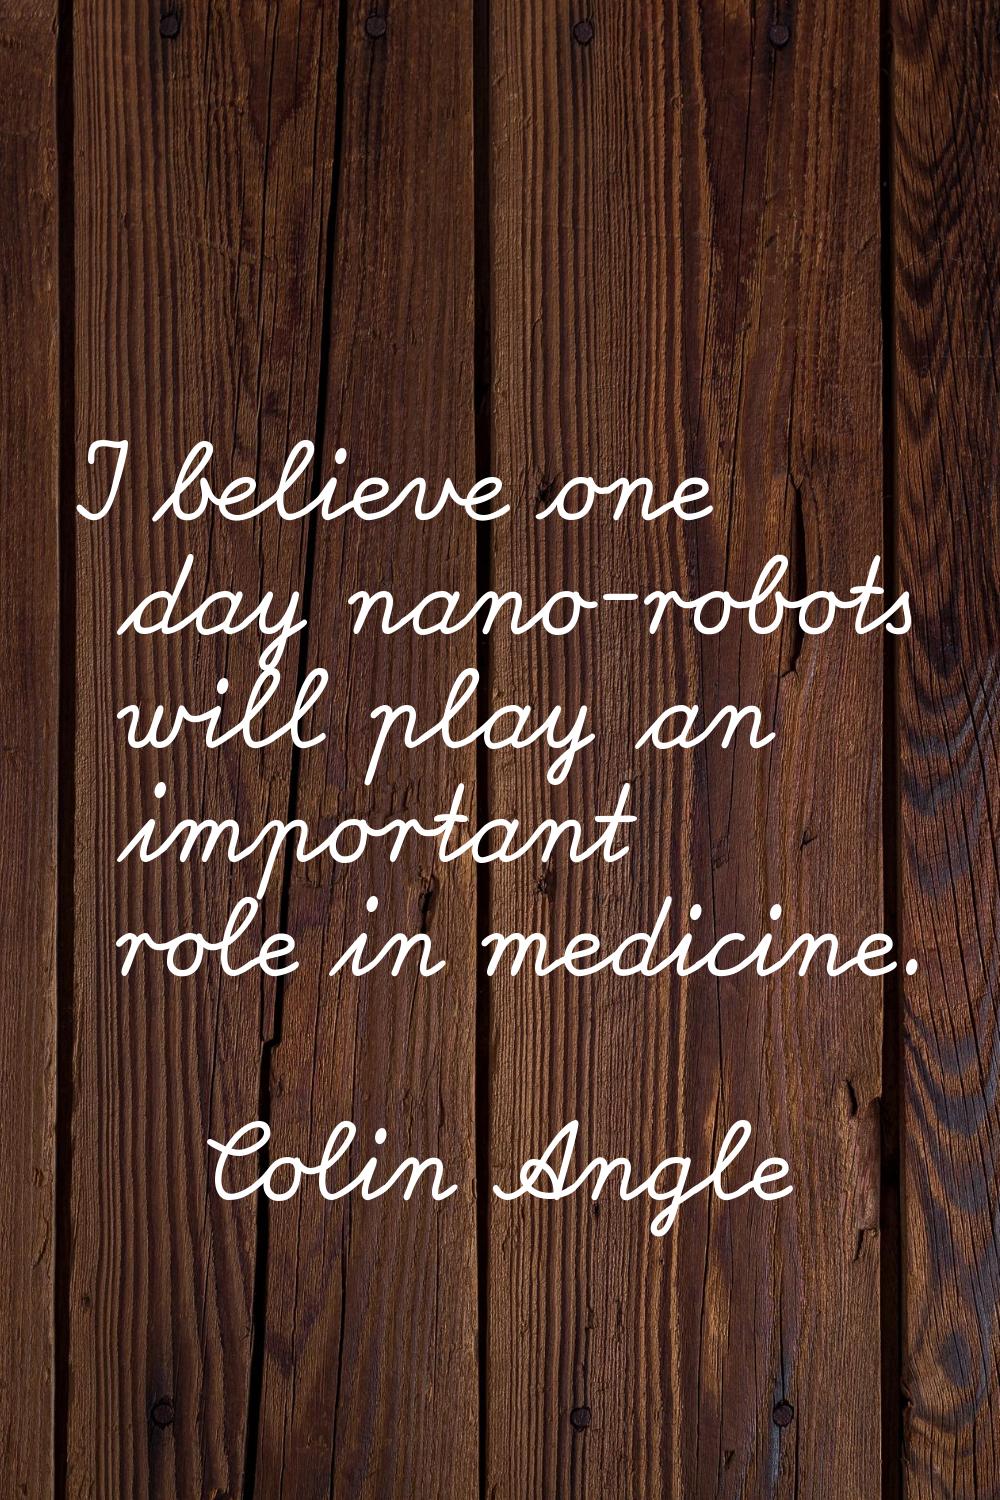 I believe one day nano-robots will play an important role in medicine.